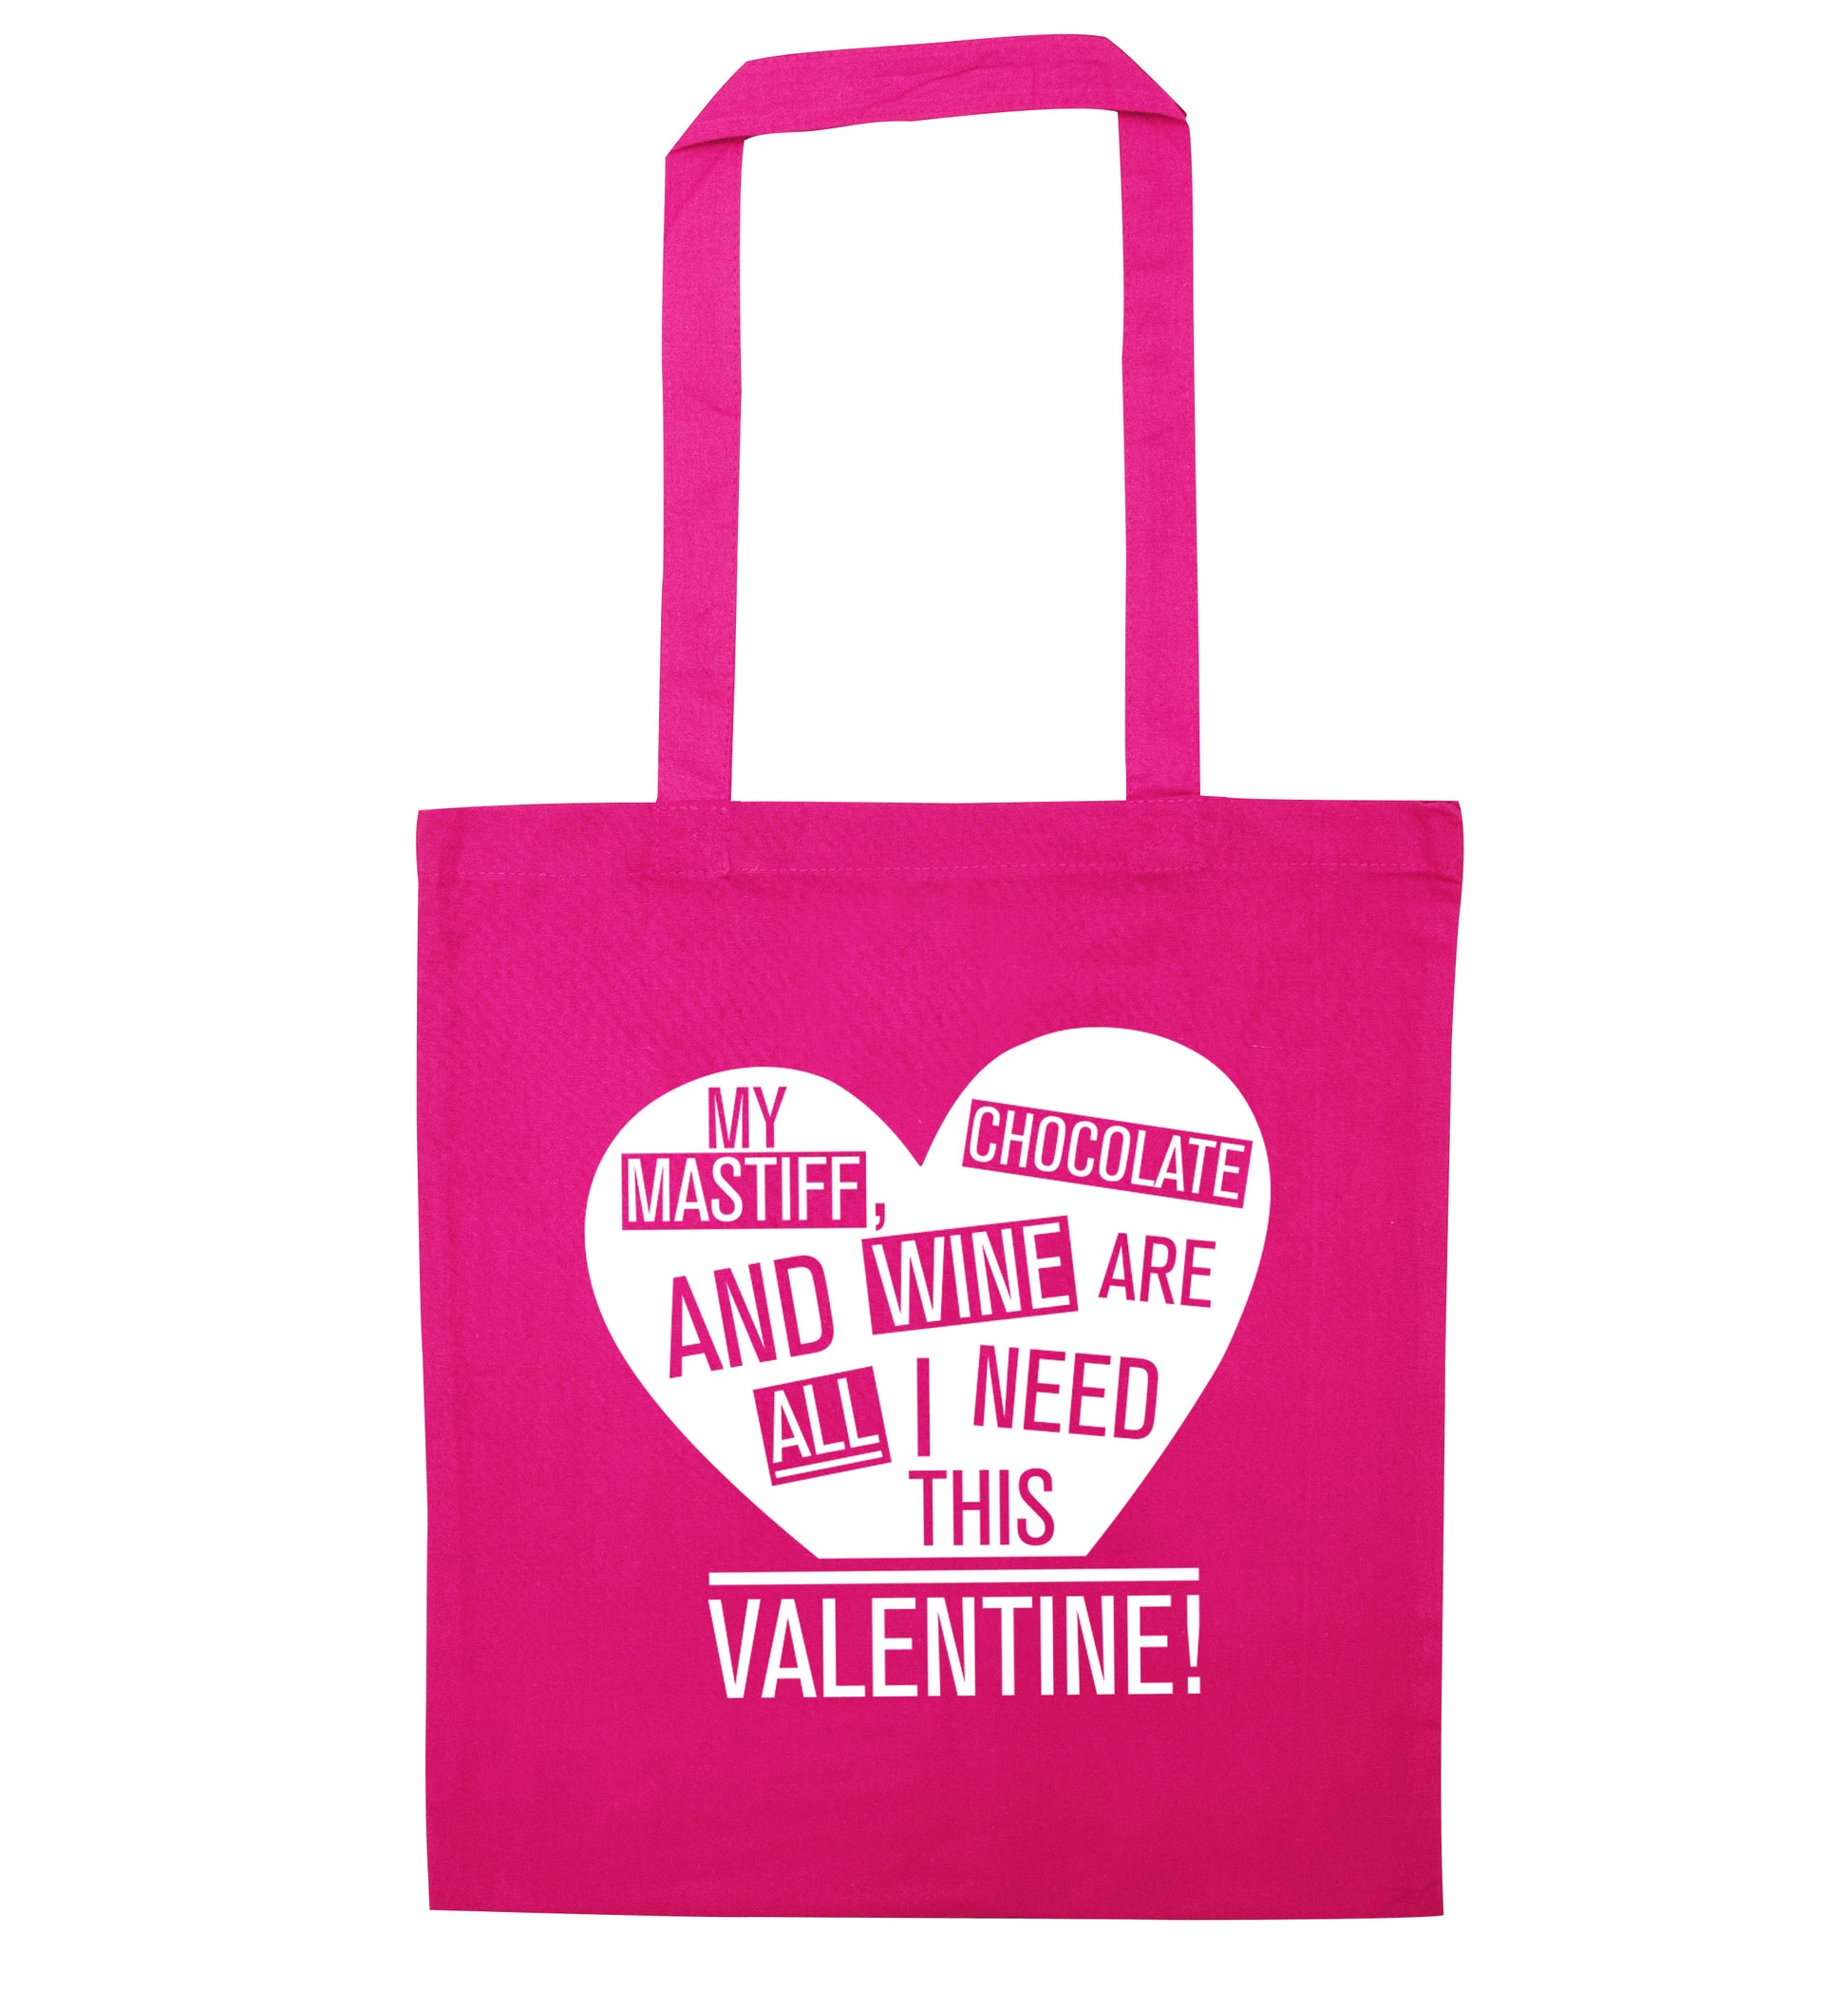 My mastiff, chocolate and wine are all I need this valentine! pink tote bag